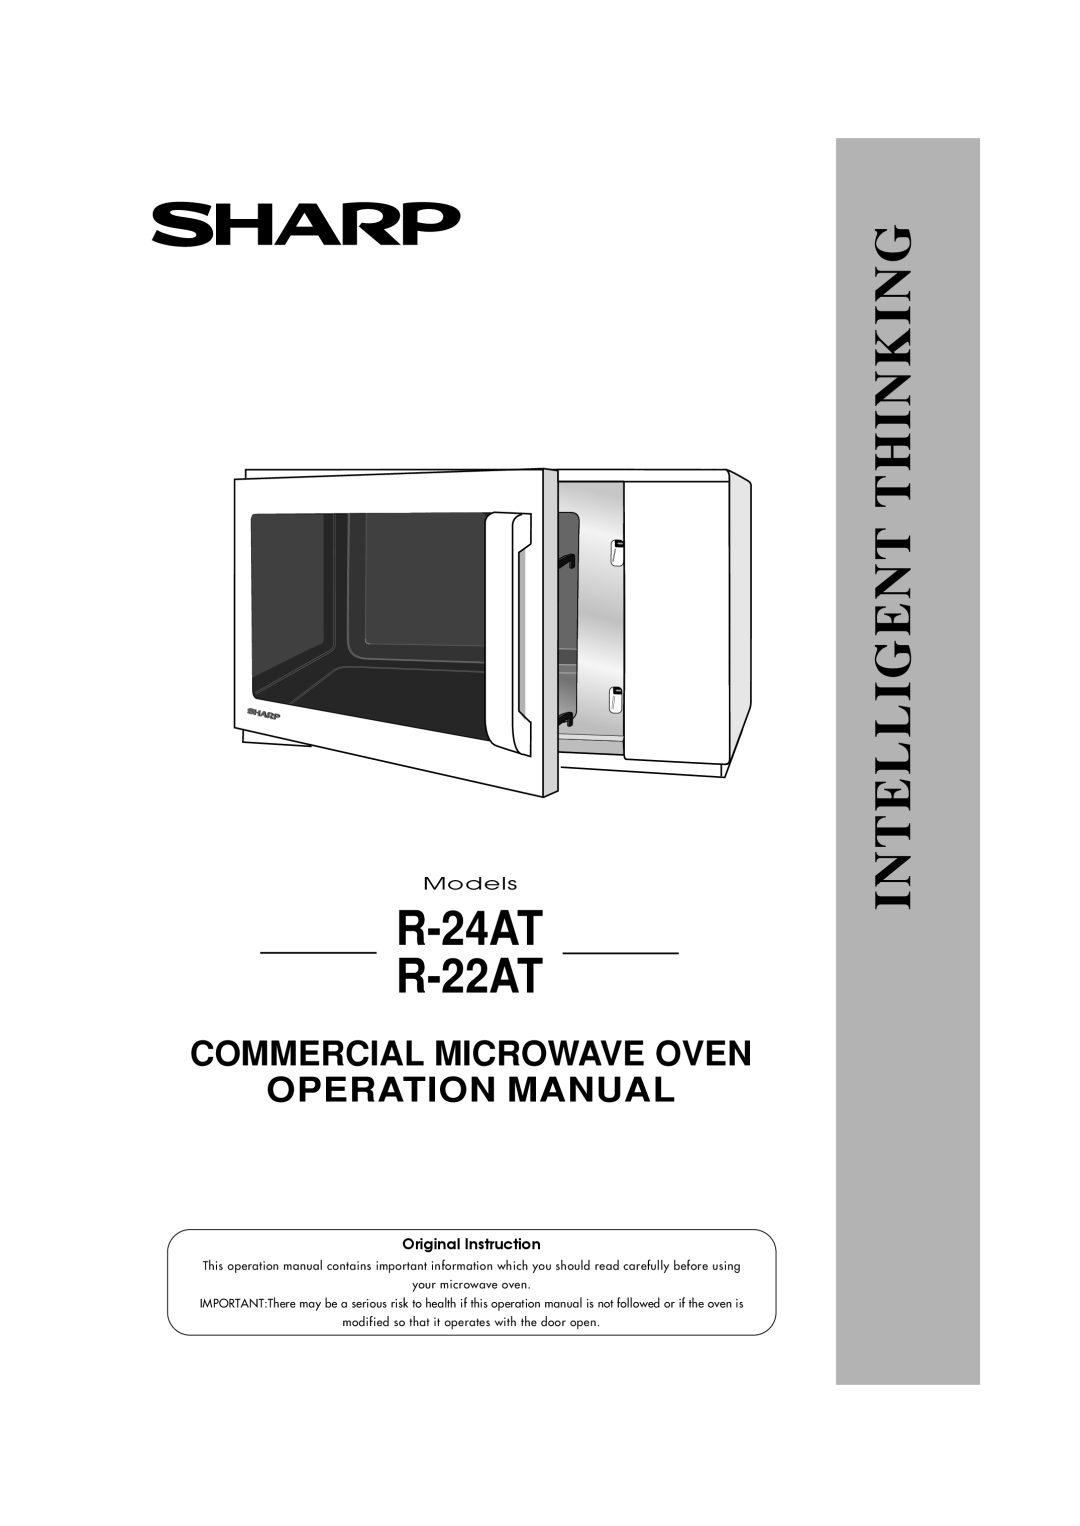 Sharp operation manual Intelligent Thinking, R-24AT R-22AT, Commercial Microwave Oven Operation Manual, Models 